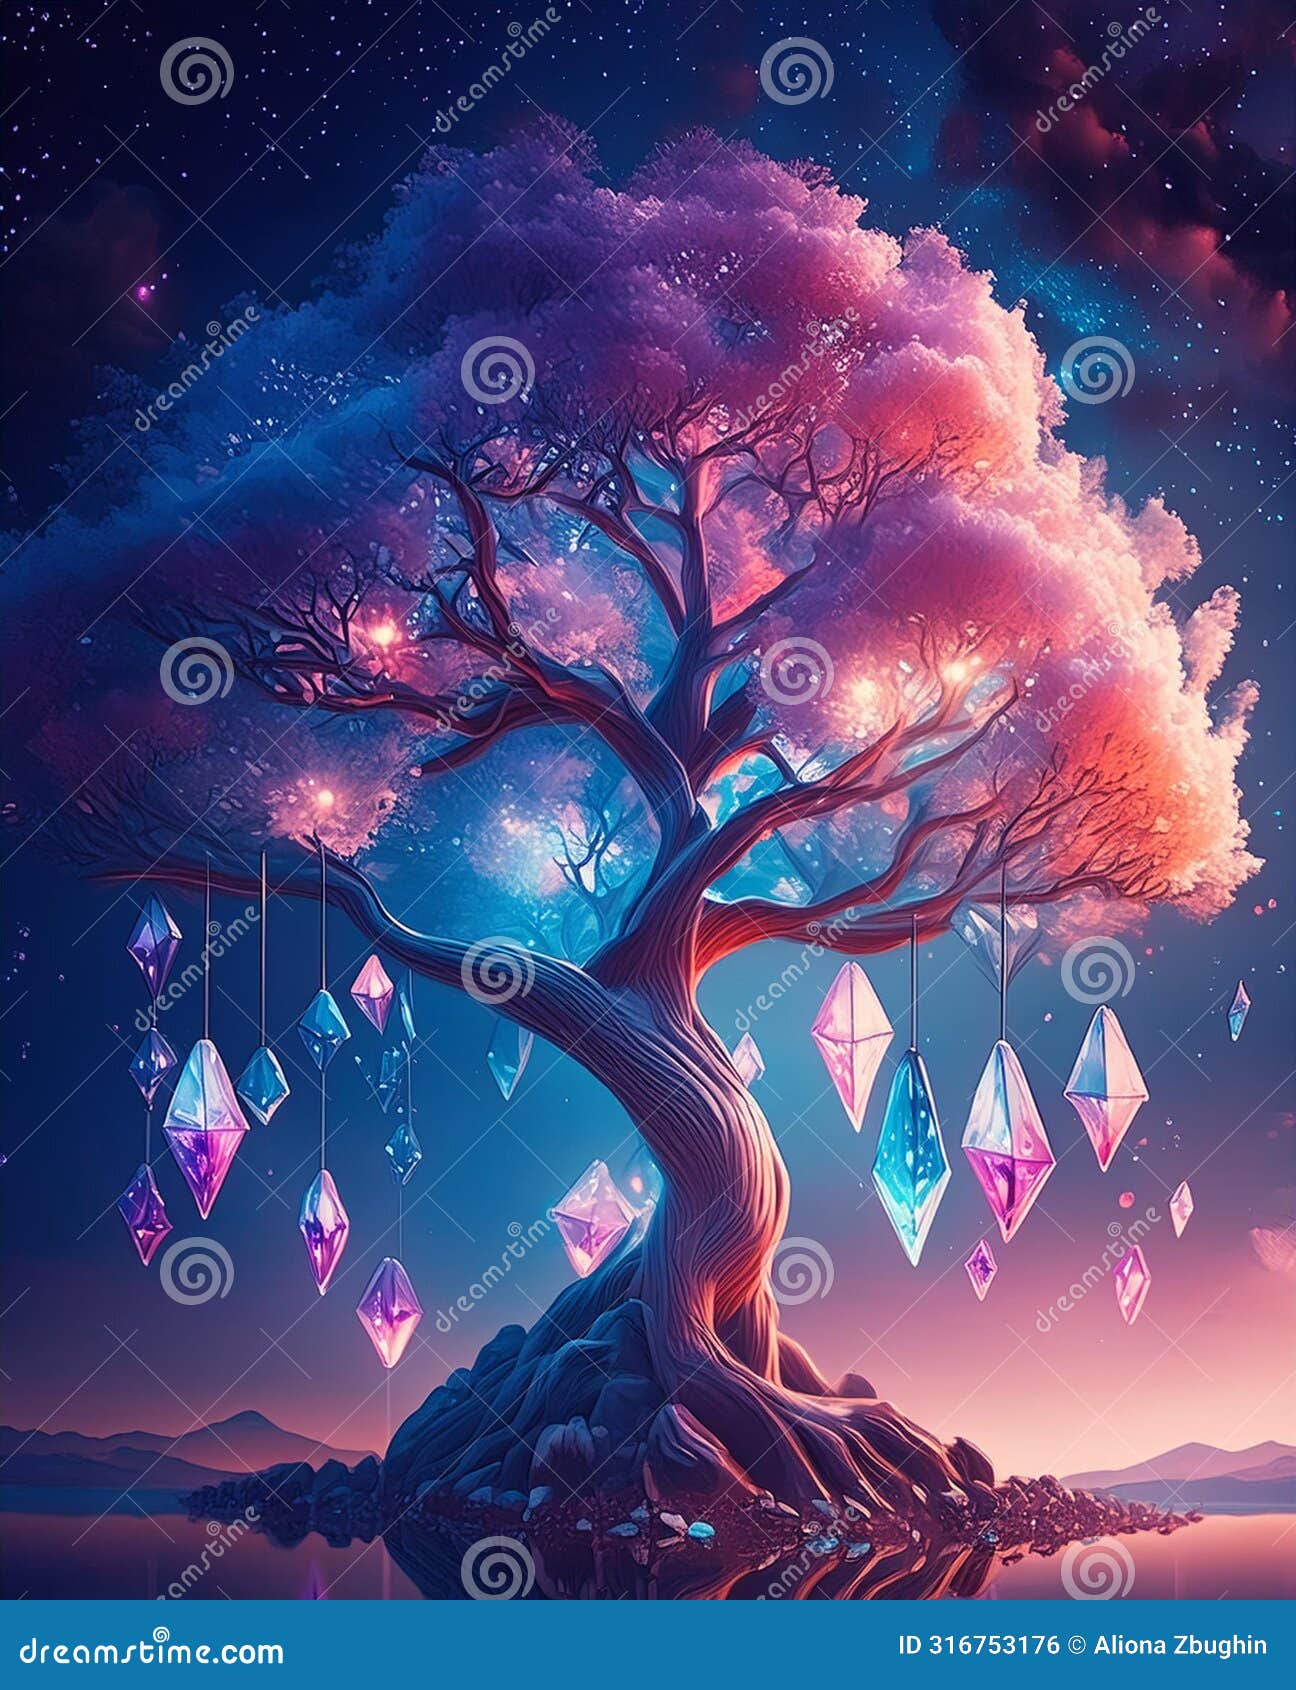 a magnificent tree, its branches reaching skyward, adorned with shimmering colorful crystals